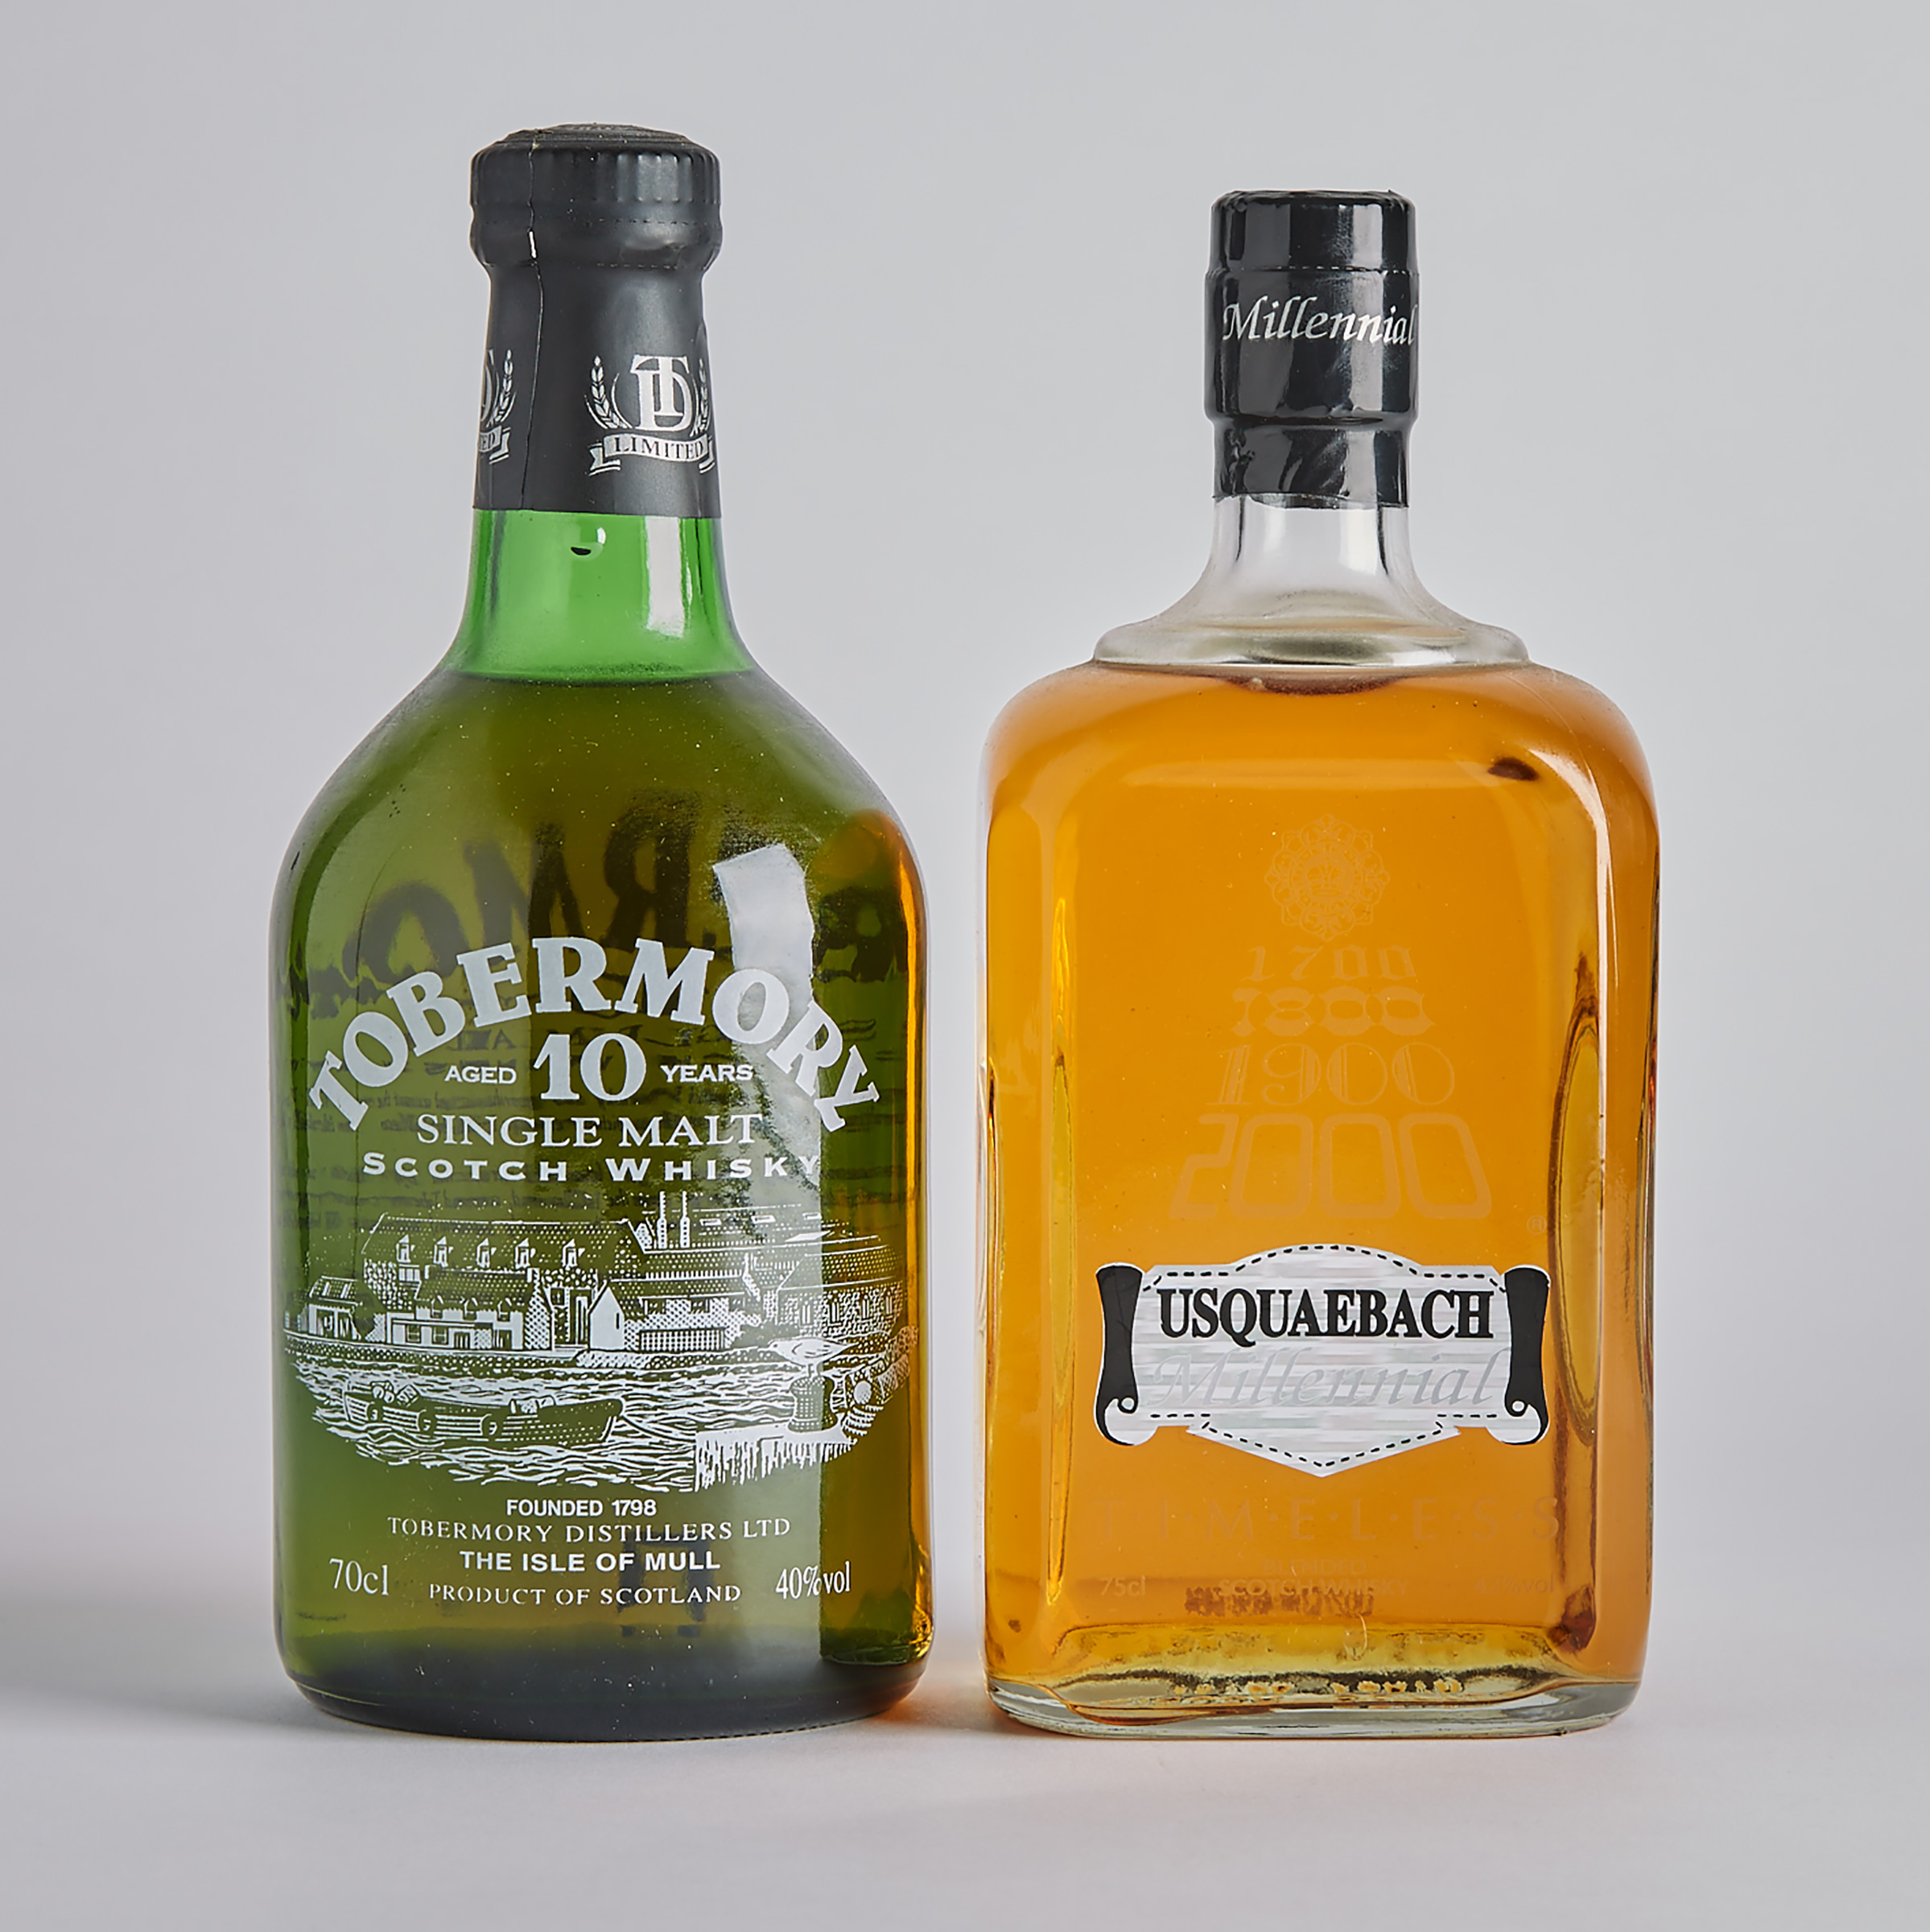 TOBERMORY SINGLE MALT SCOTCH WHISKY 10 YRS (ONE 70 CL)
USQUAEBACH MILLENNIAL BLENDED WHISKY (ONE 75 CL)